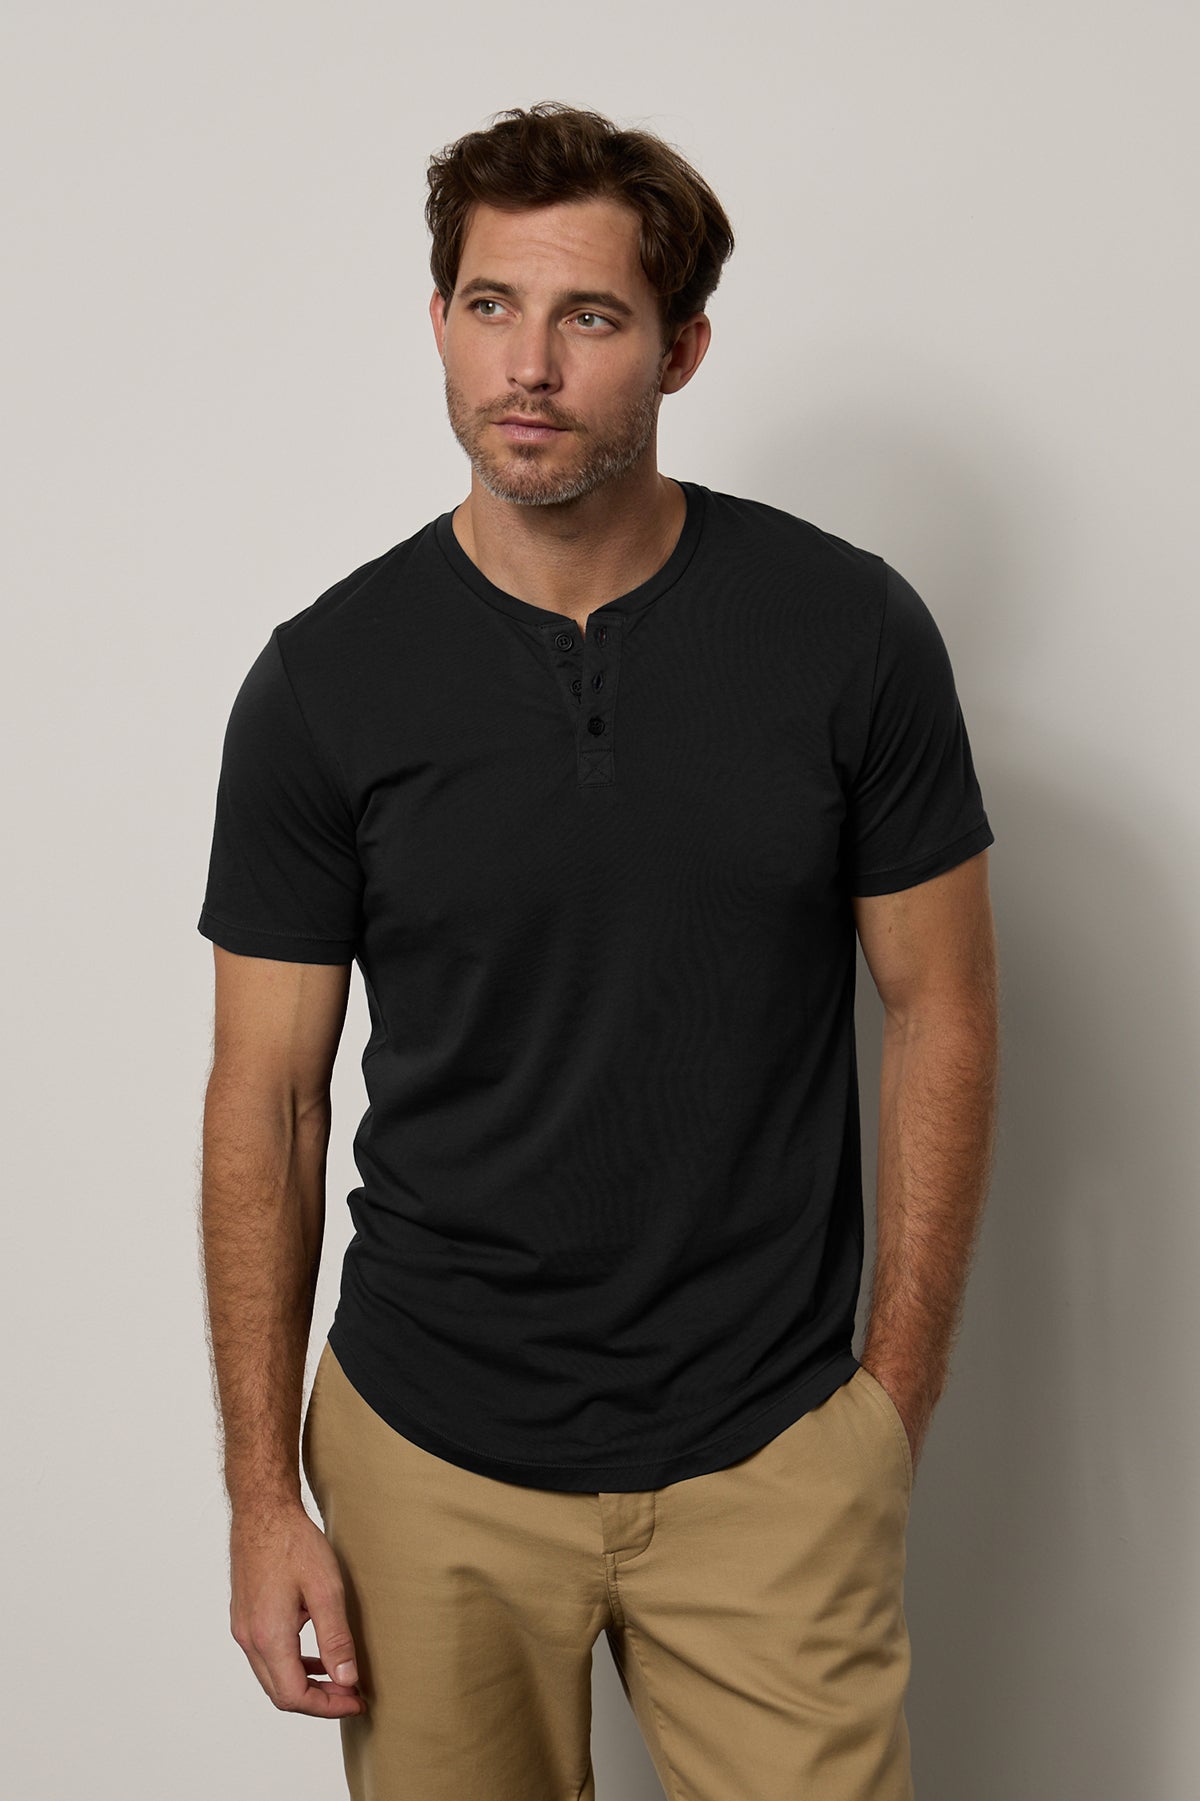 A man standing against a neutral background, wearing a black Fulton Henley tee by Velvet by Graham & Spencer with a curved hemline and beige pants, looking slightly to his left.-25943764172993